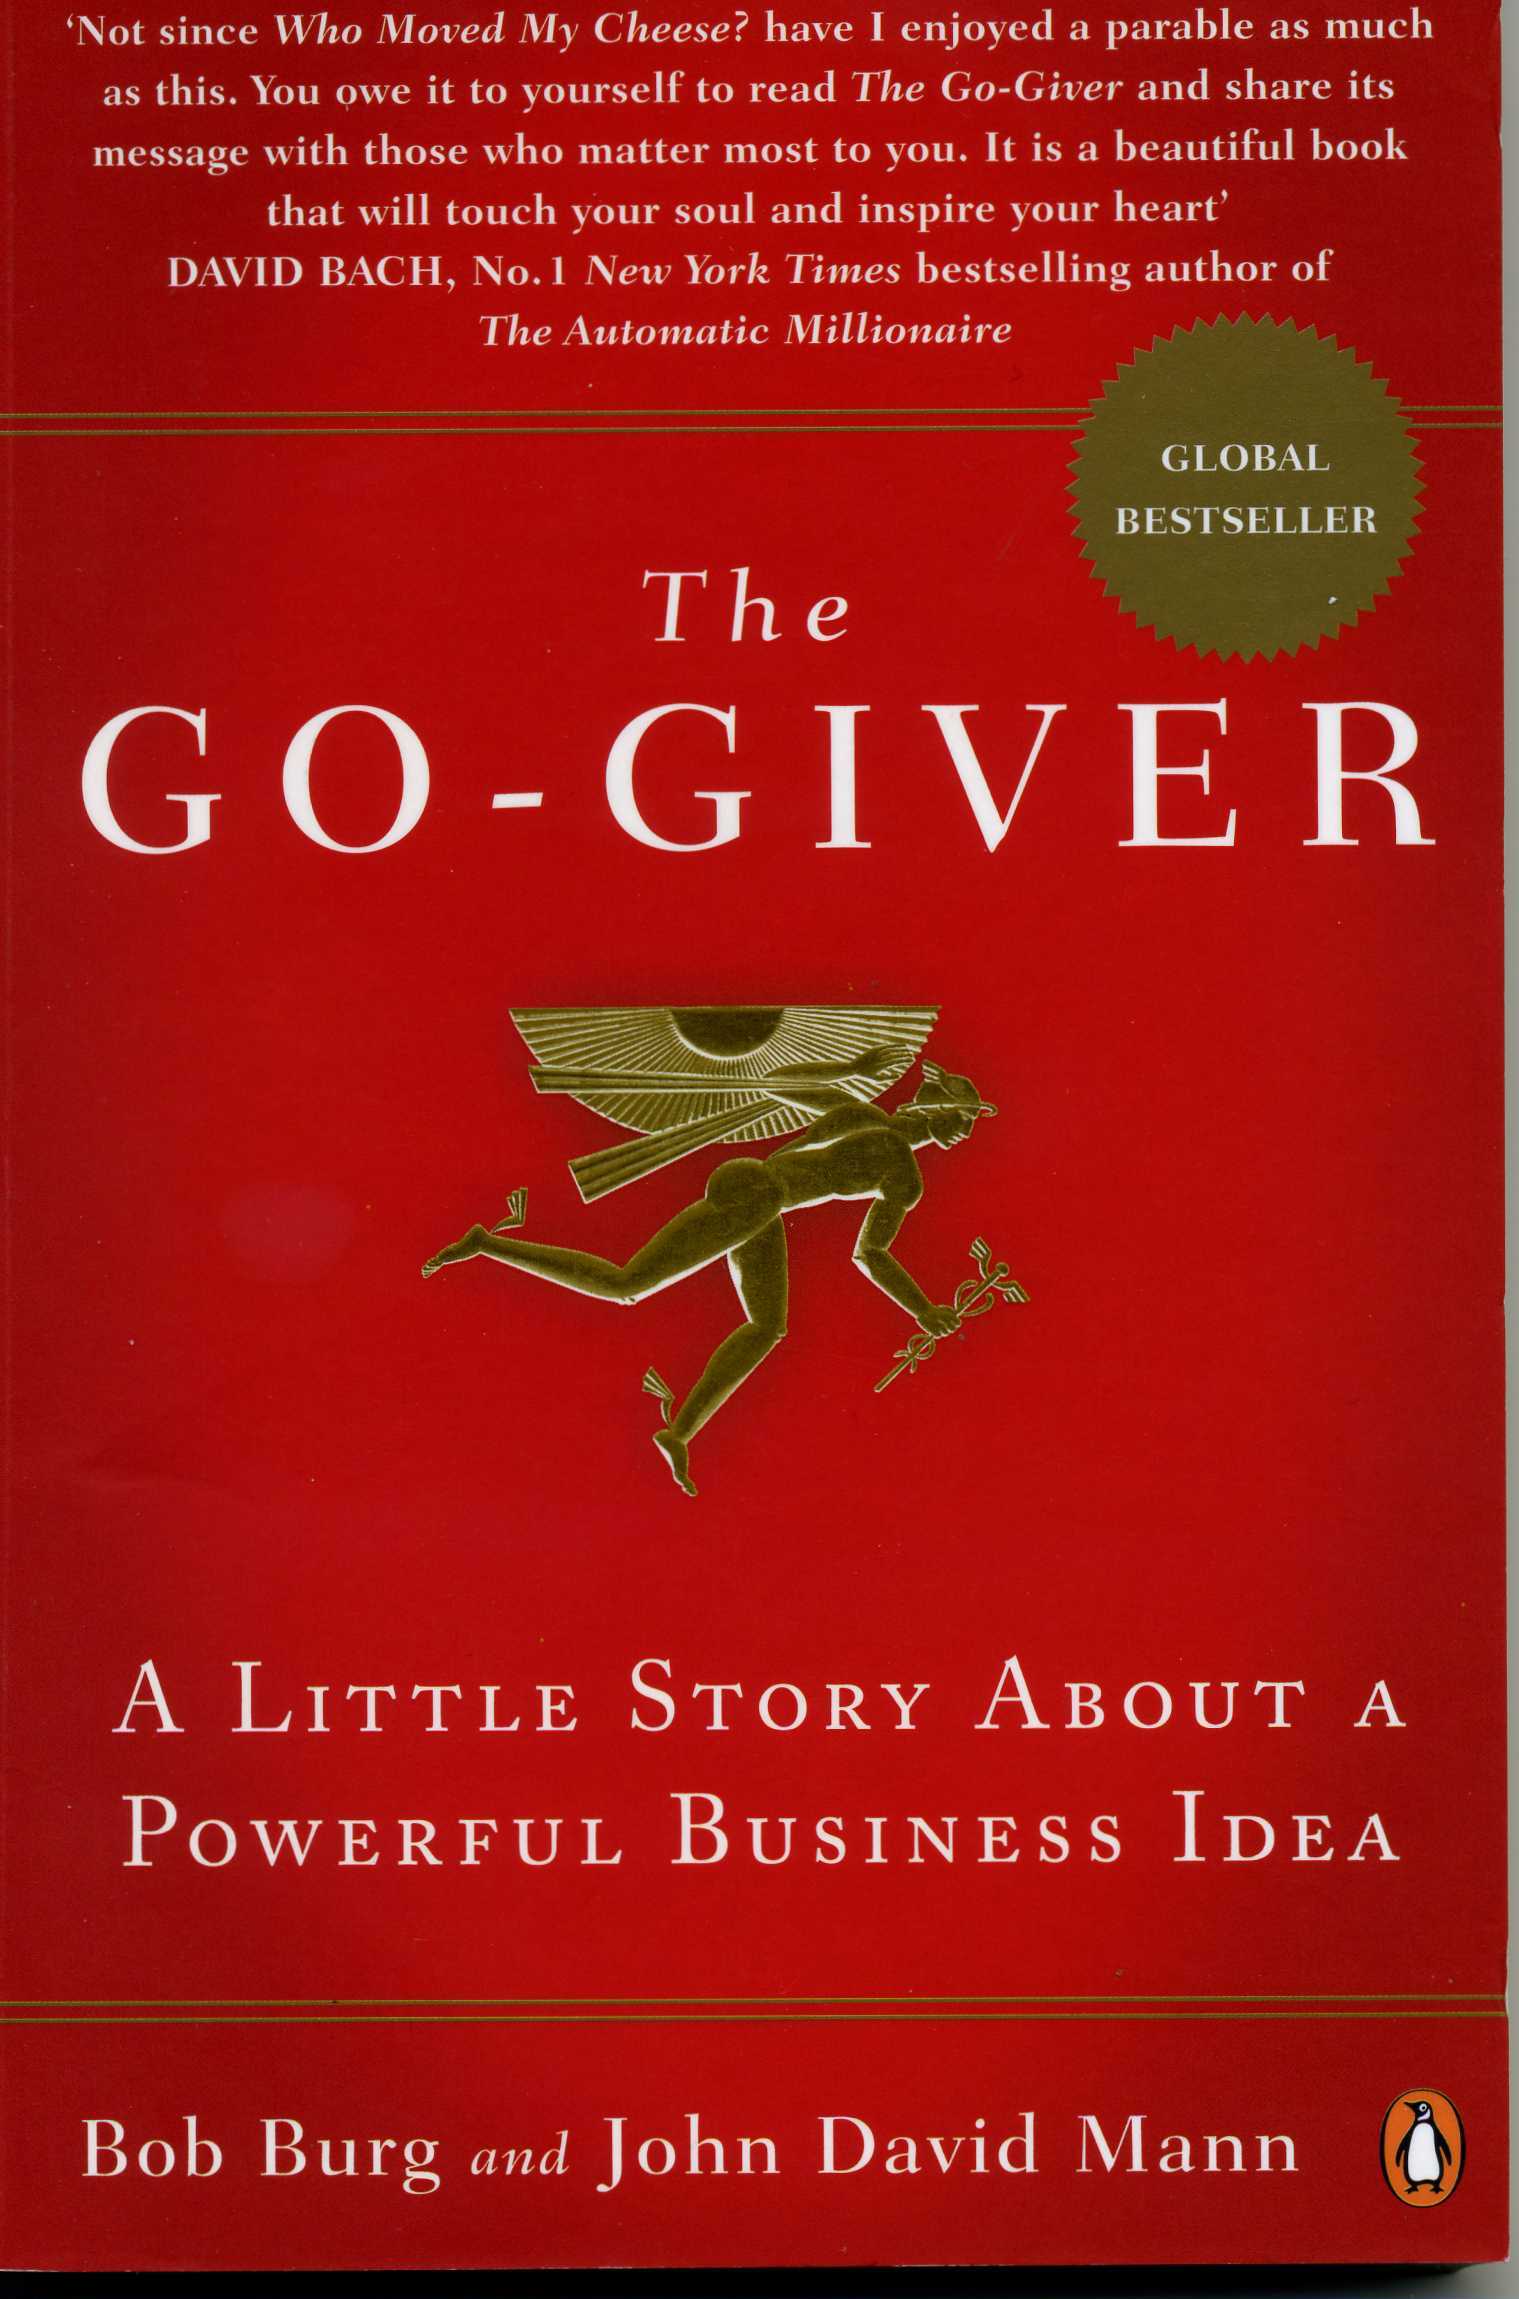 The Go-Giver cover.jpg